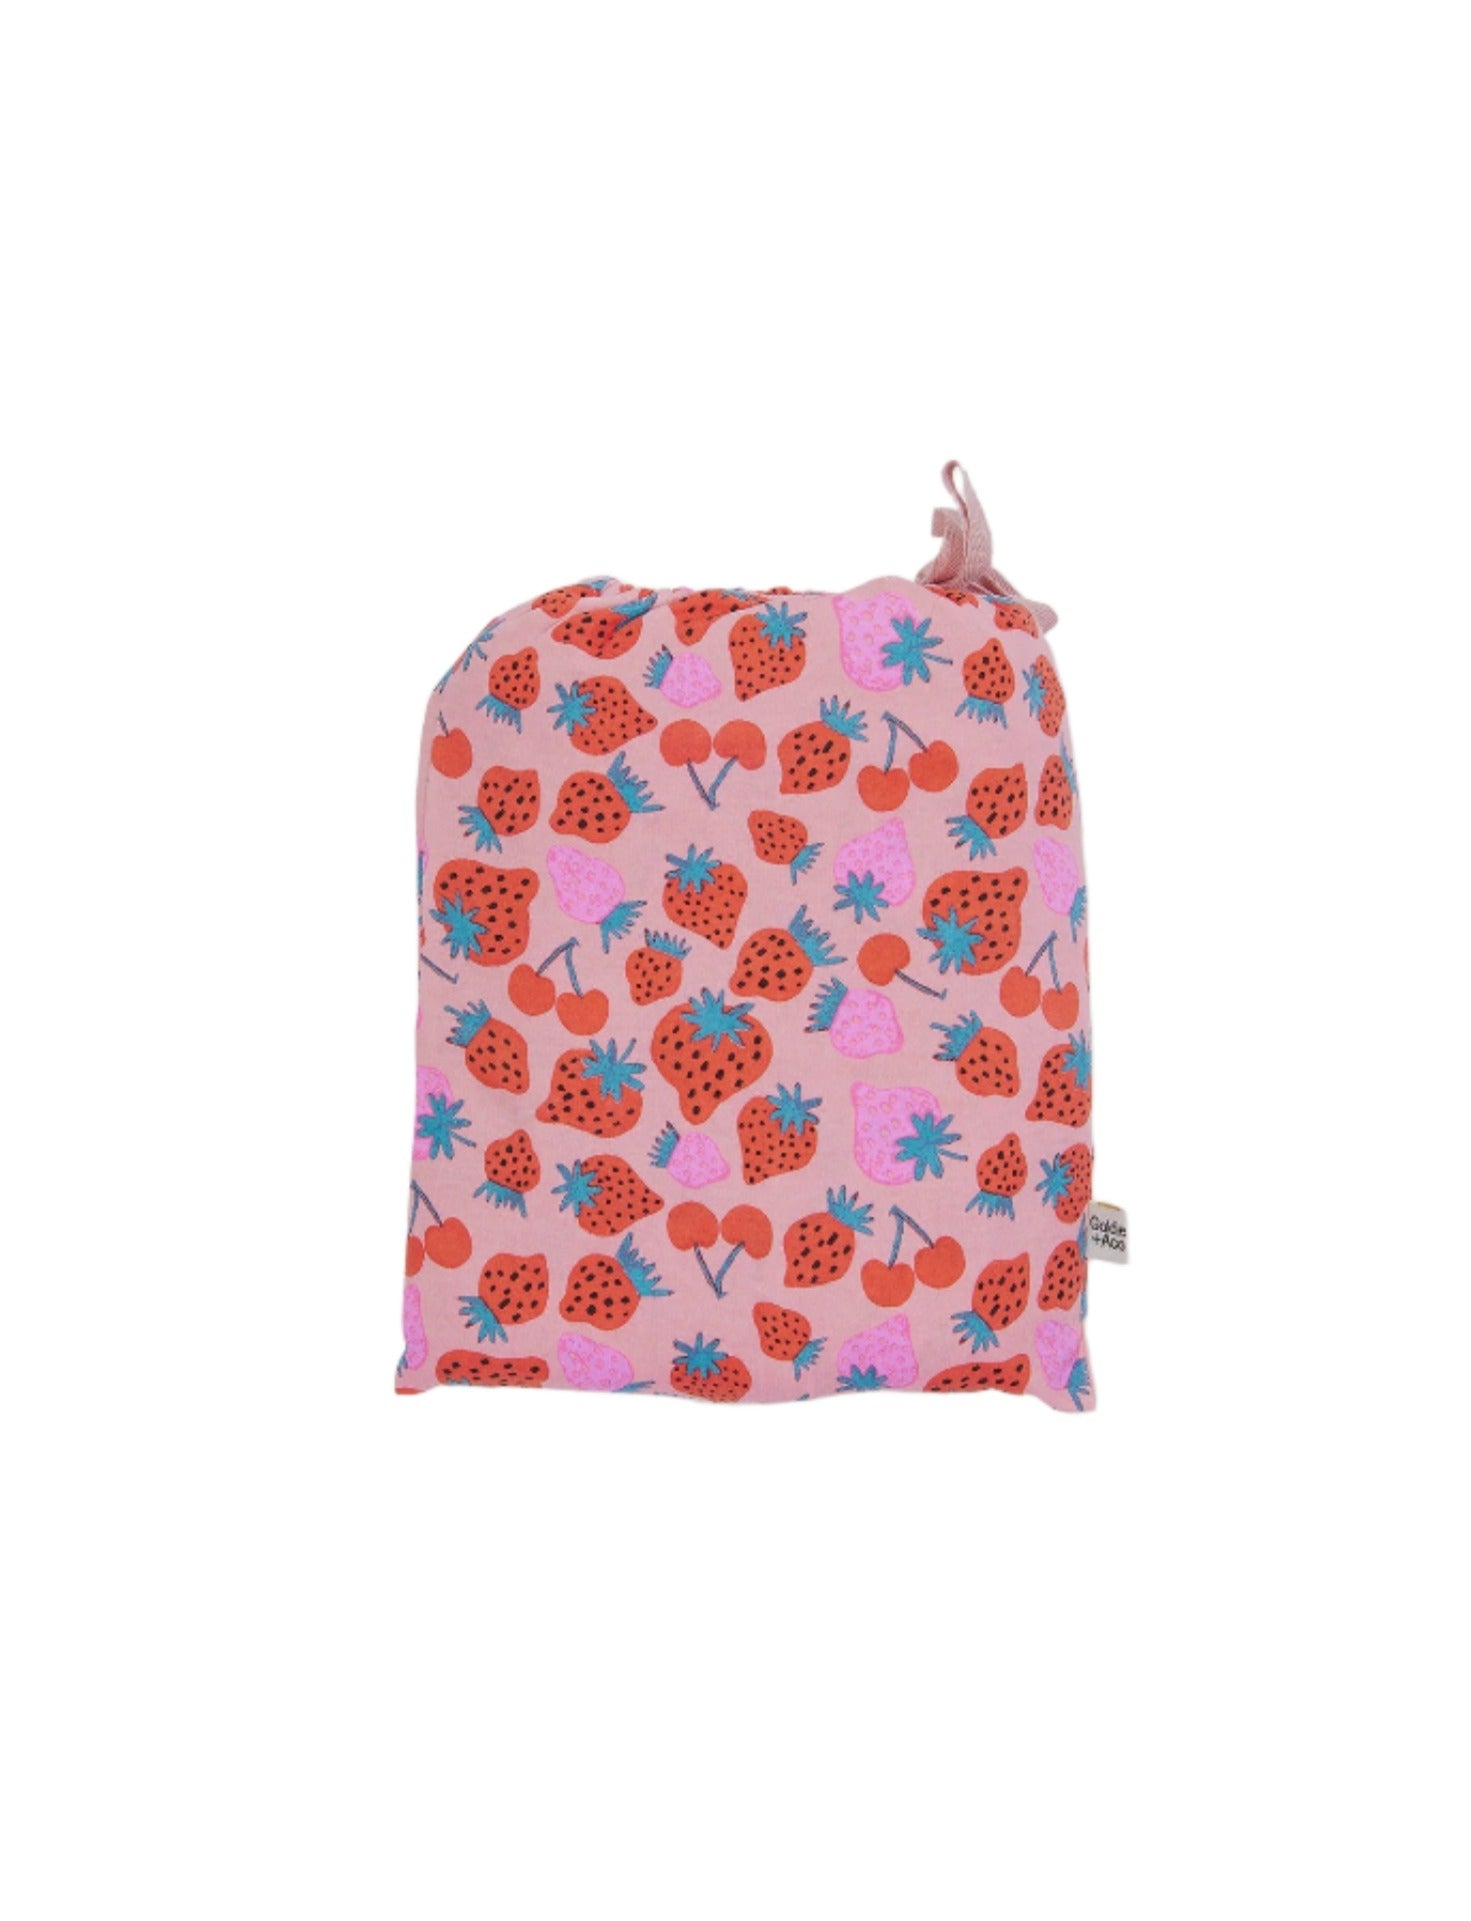 SALLY STRAWBERRY PRINT FITTED SHEET | Goldie and Ace